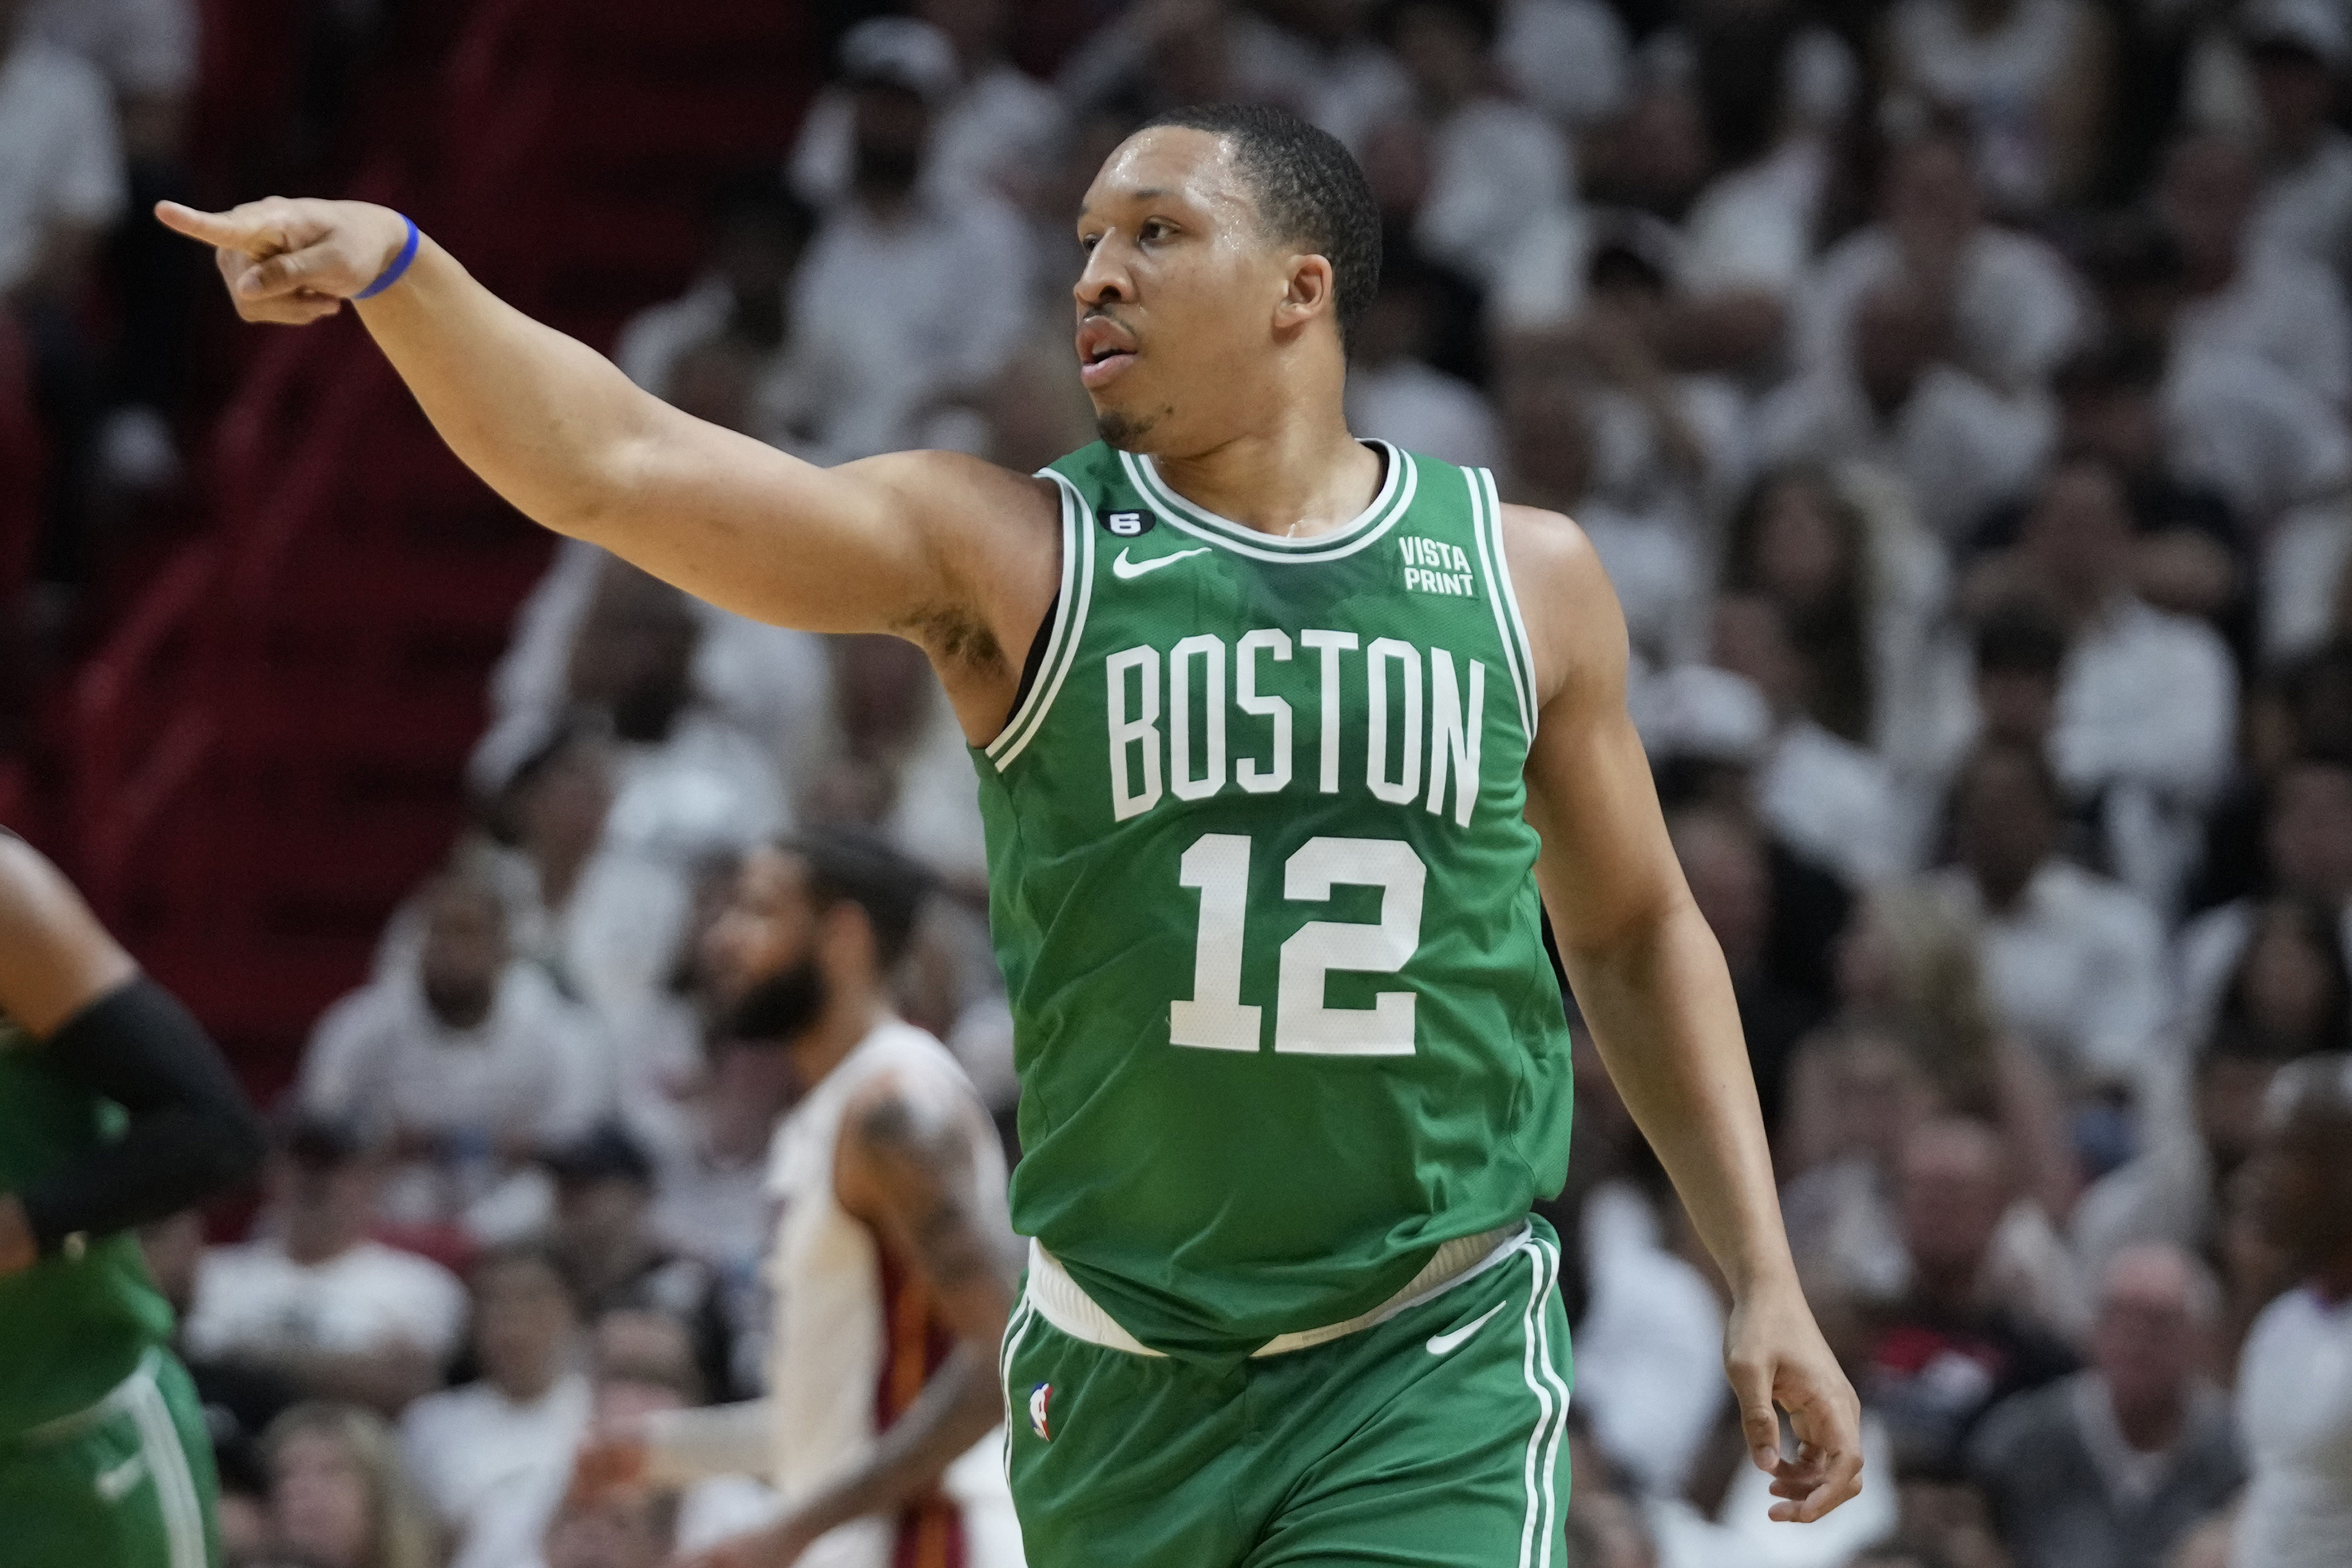 Mavericks finalizing trade for Grant Williams in 3-team deal with Celtics,  Spurs: Sources - The Athletic